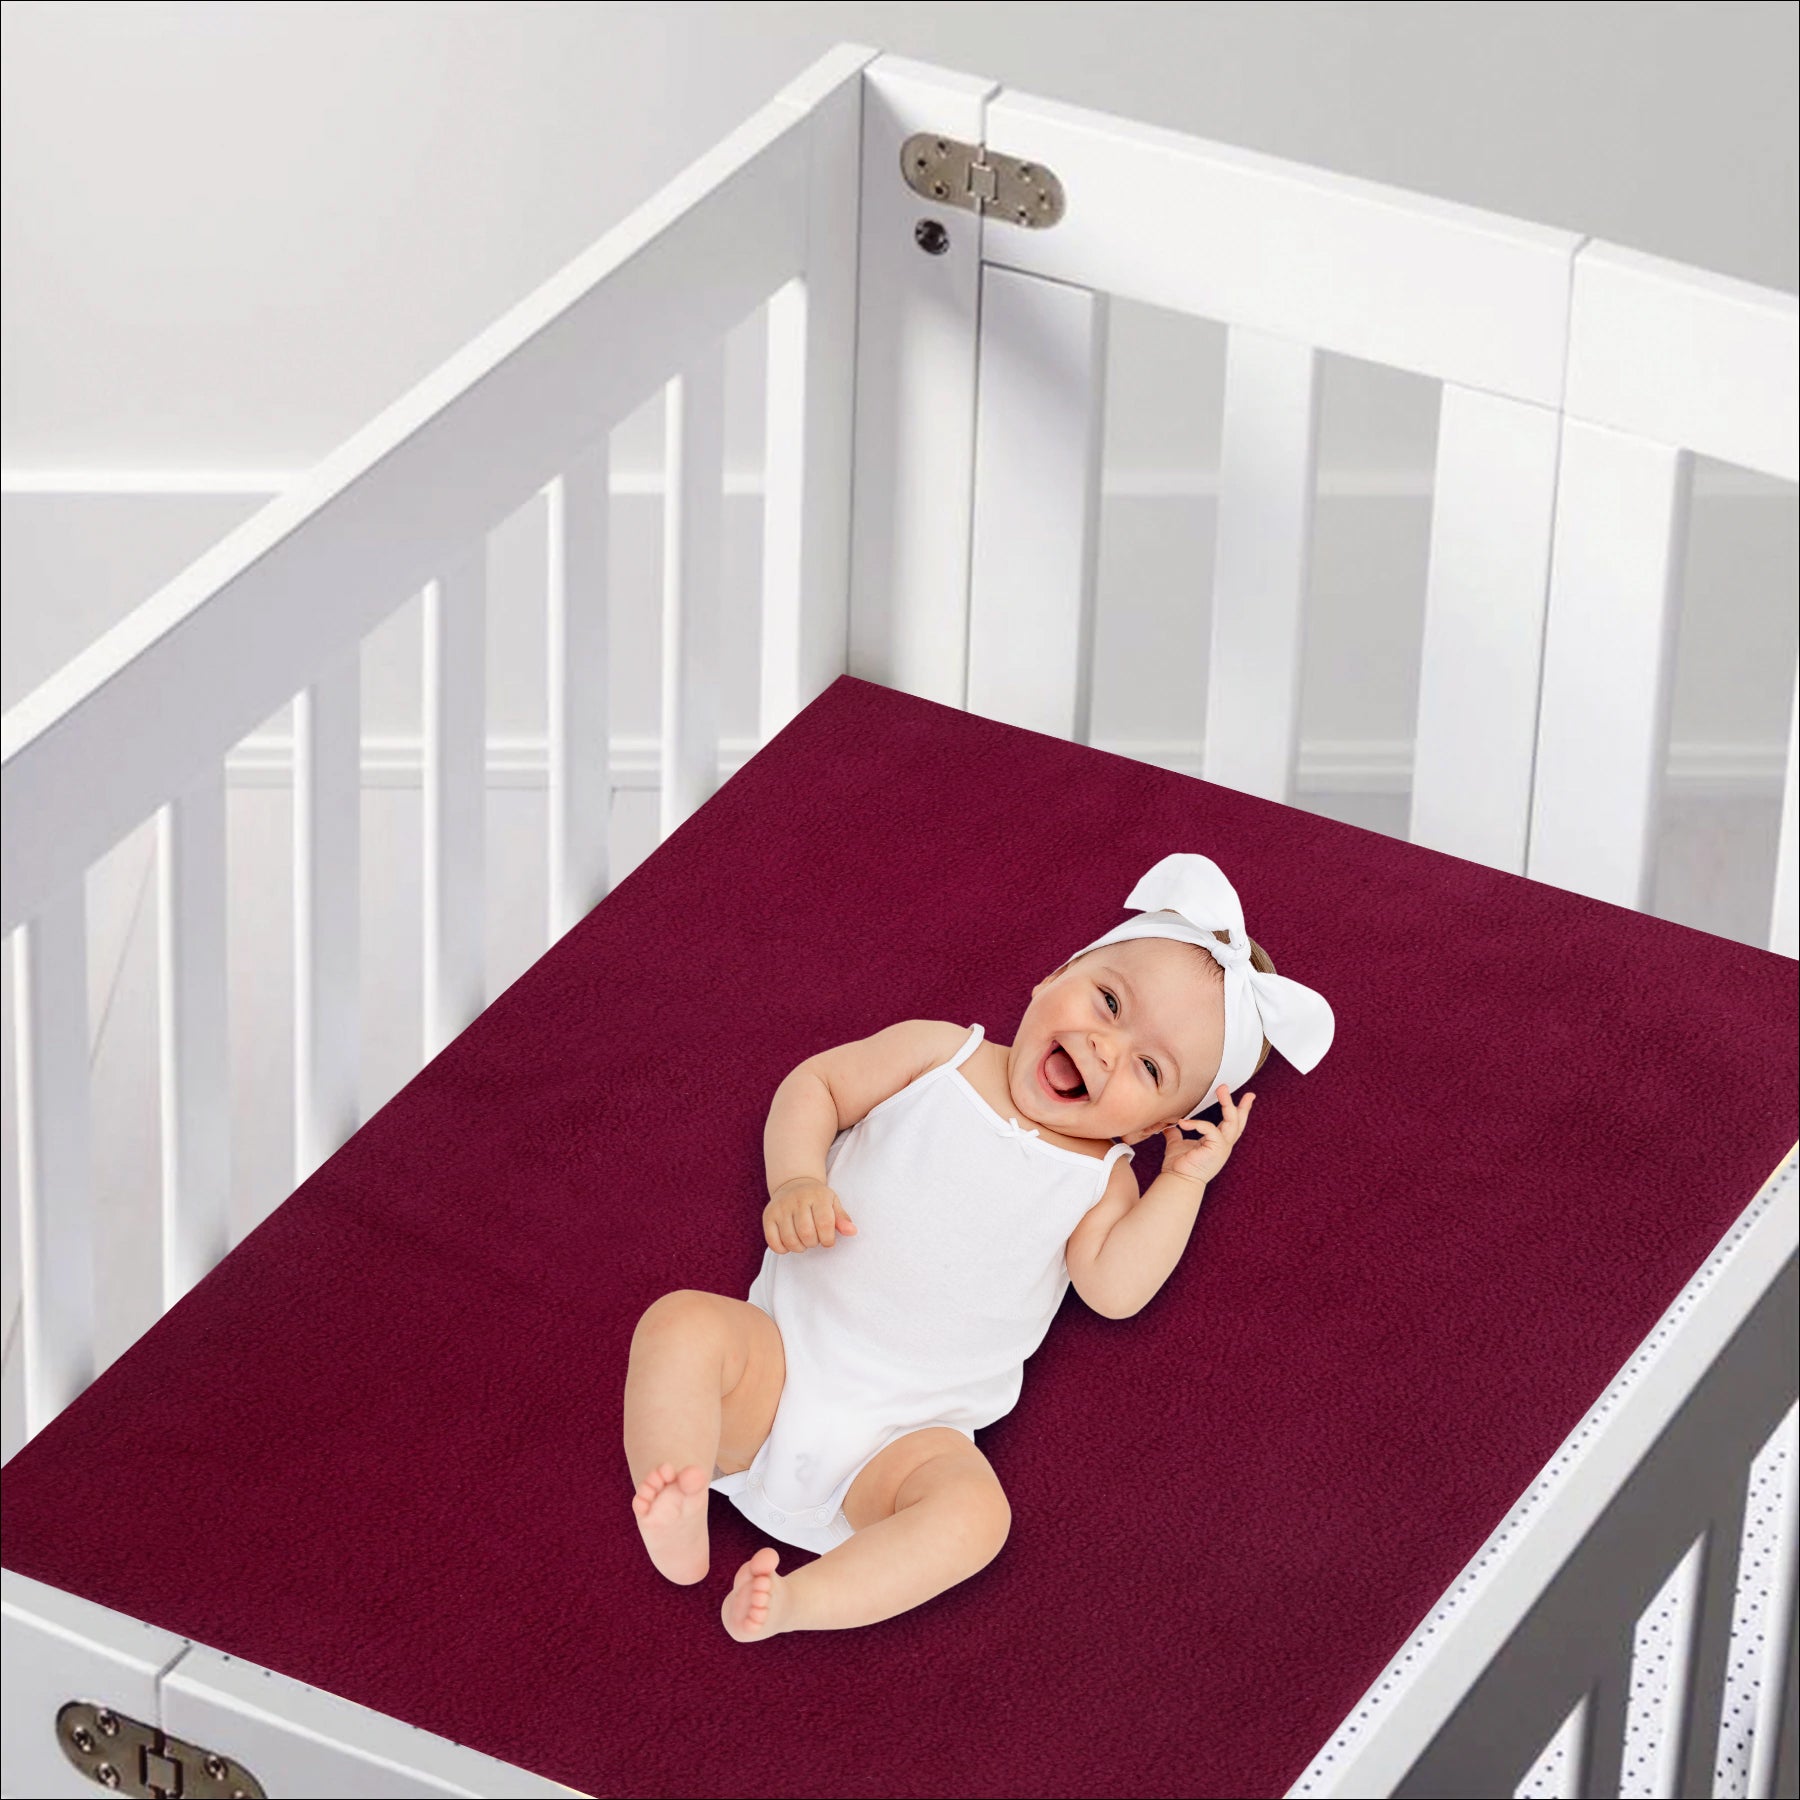 Plain Maroon Water-Resistant Bed Protector - 3 sizes - Baby Moo